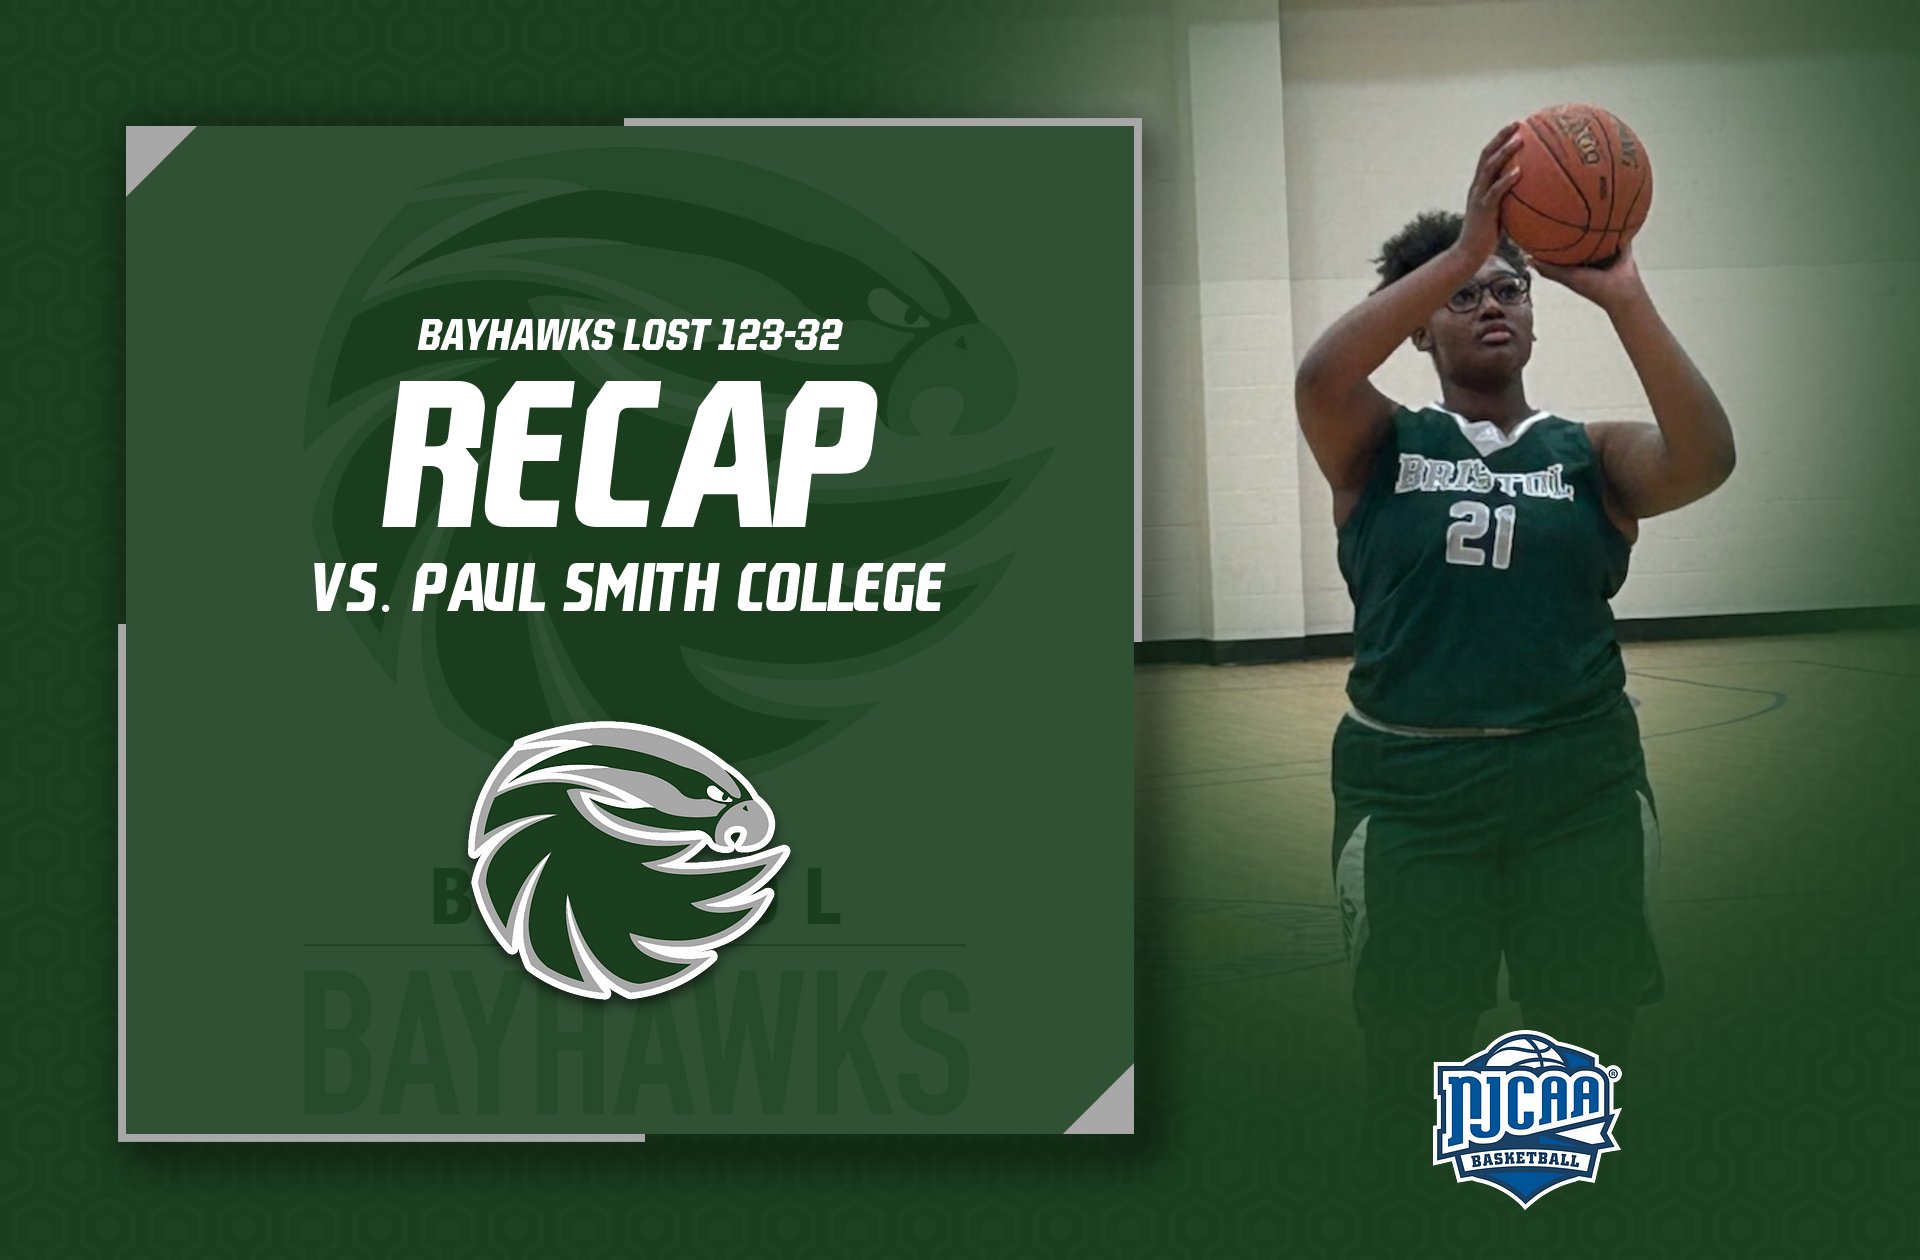 Bayhawks Lose to Paul Smith College